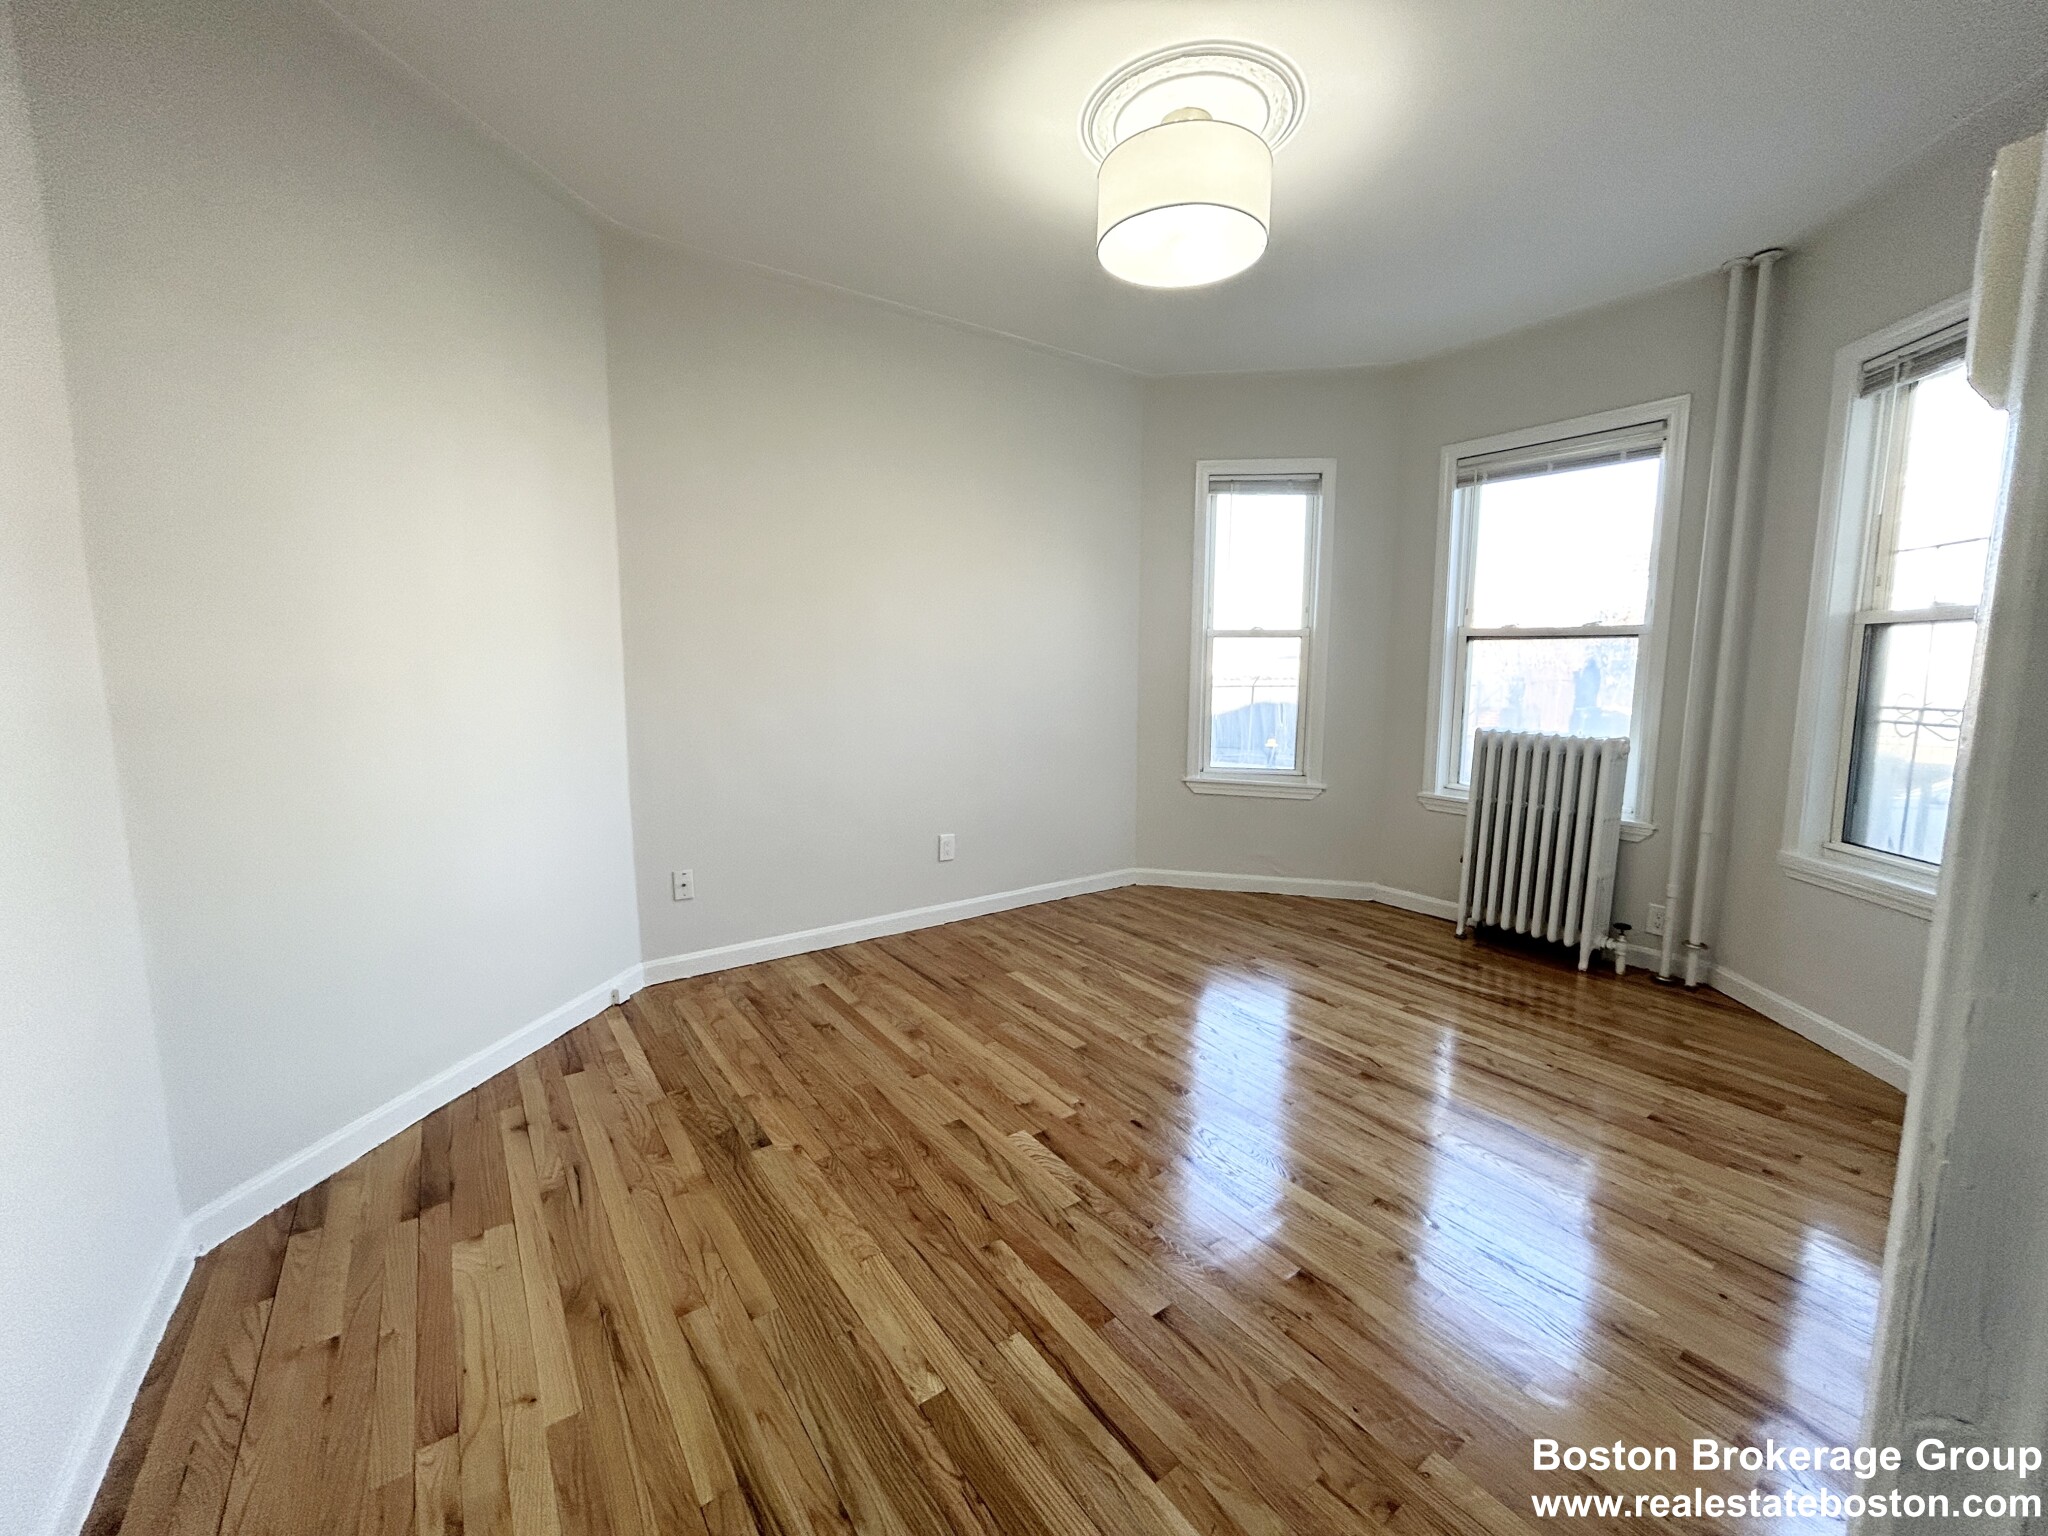 Photos of apartment on East Cottage,Boston MA 02125